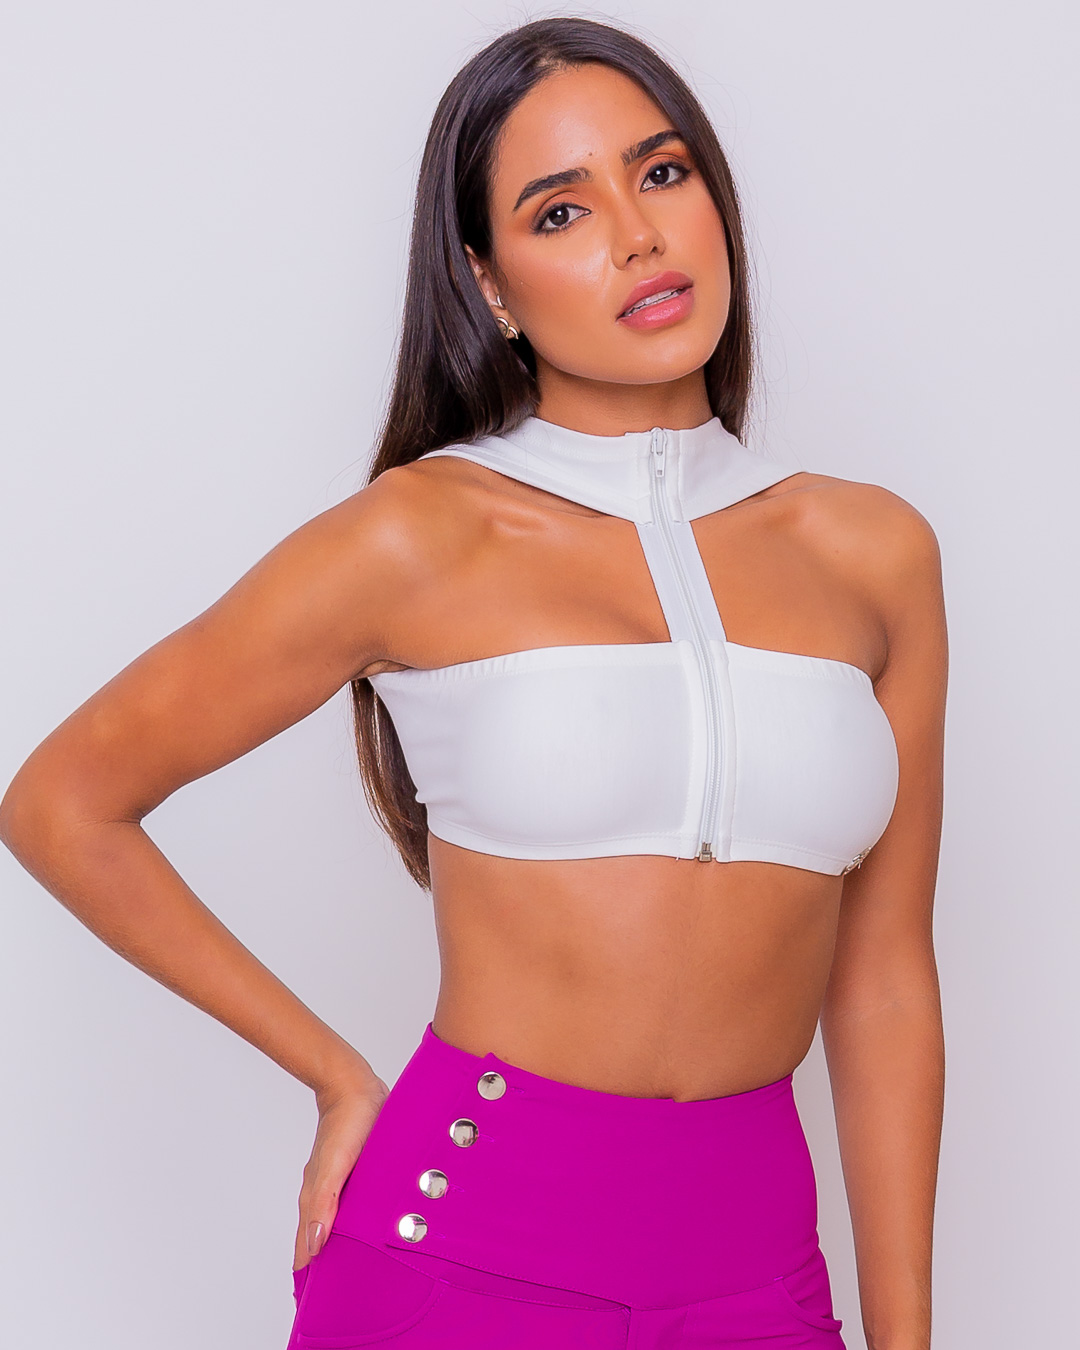 Miss Misses - Cropped Miss Misses With Zipper Offwhite - 18689030